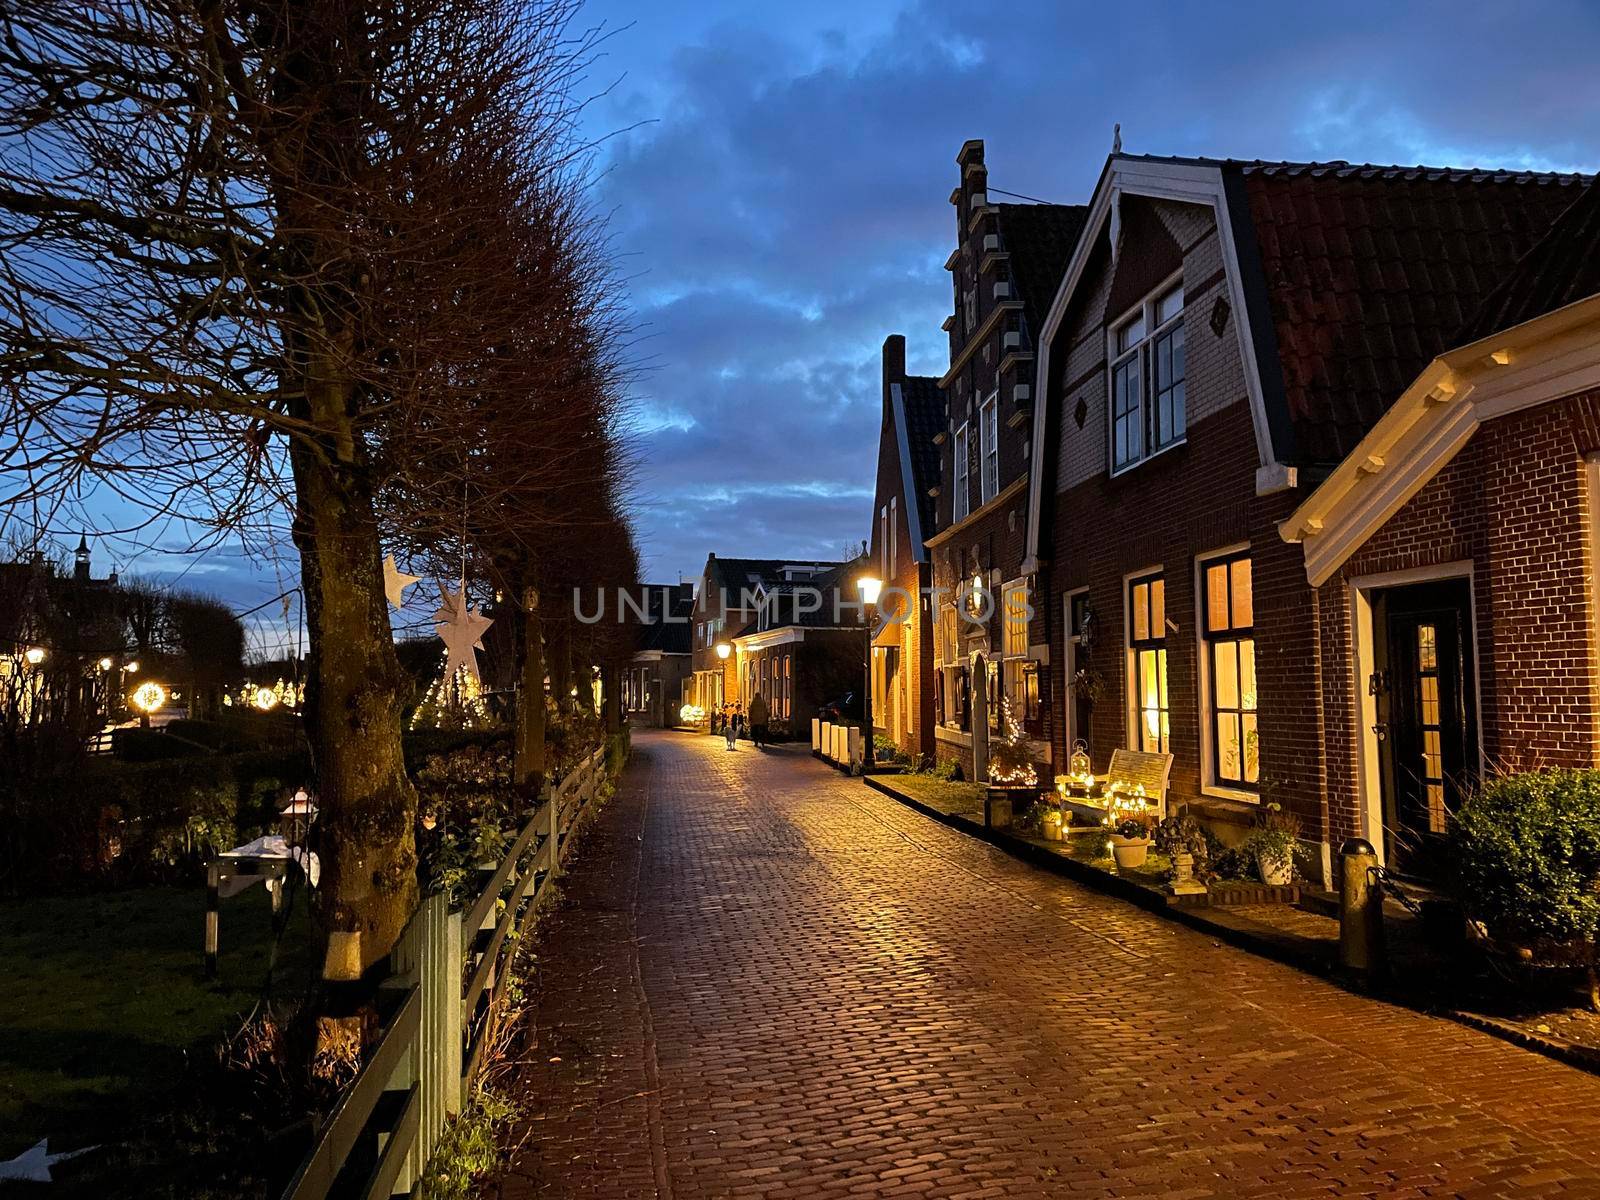 Street at night in IJlst Friesland The Netherlands